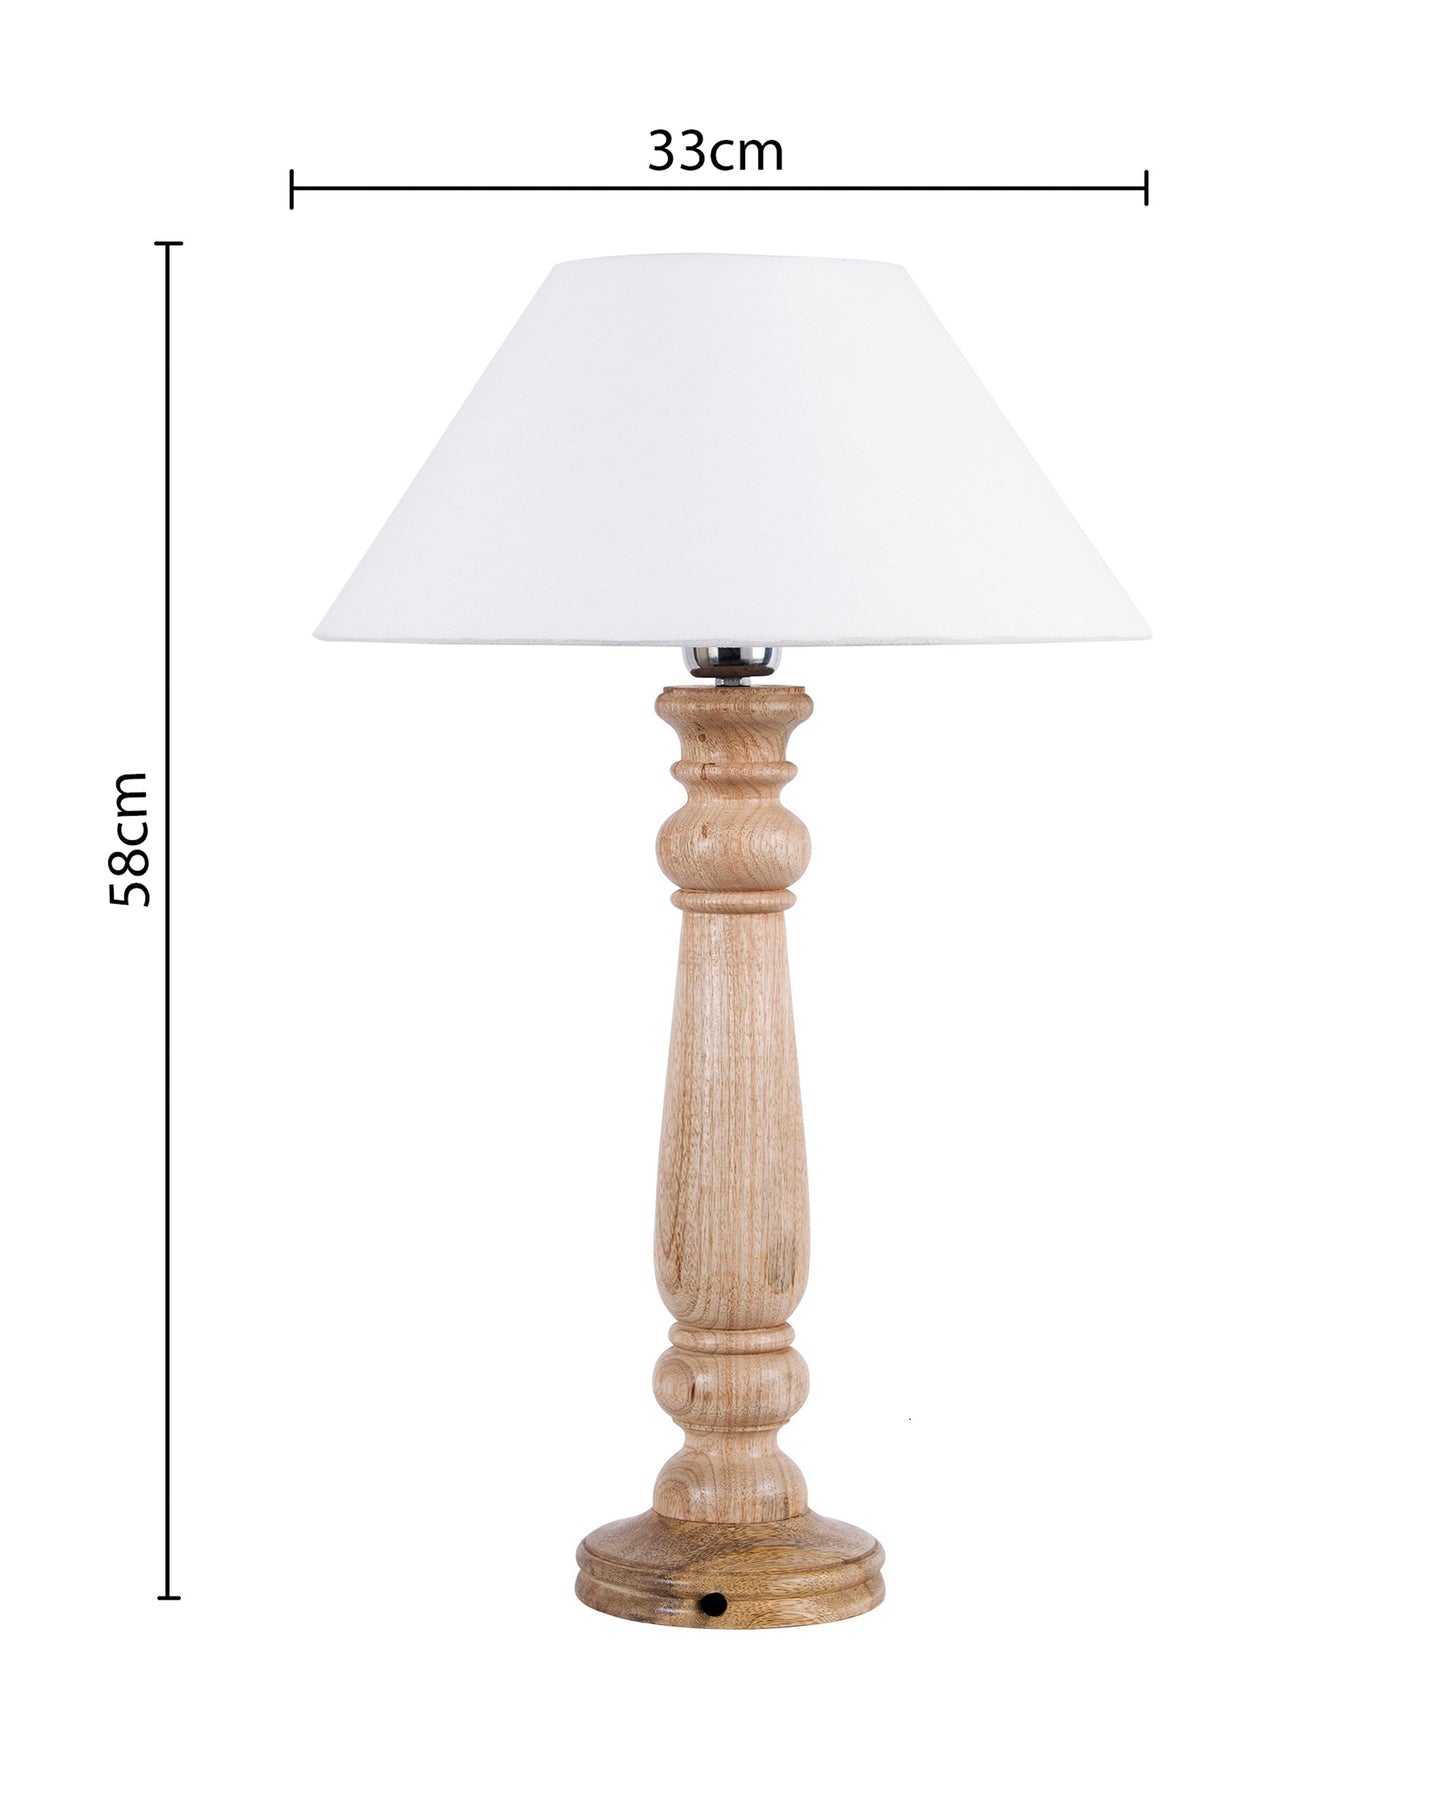 Mabel Rustic Wood Table Lamp With Shade